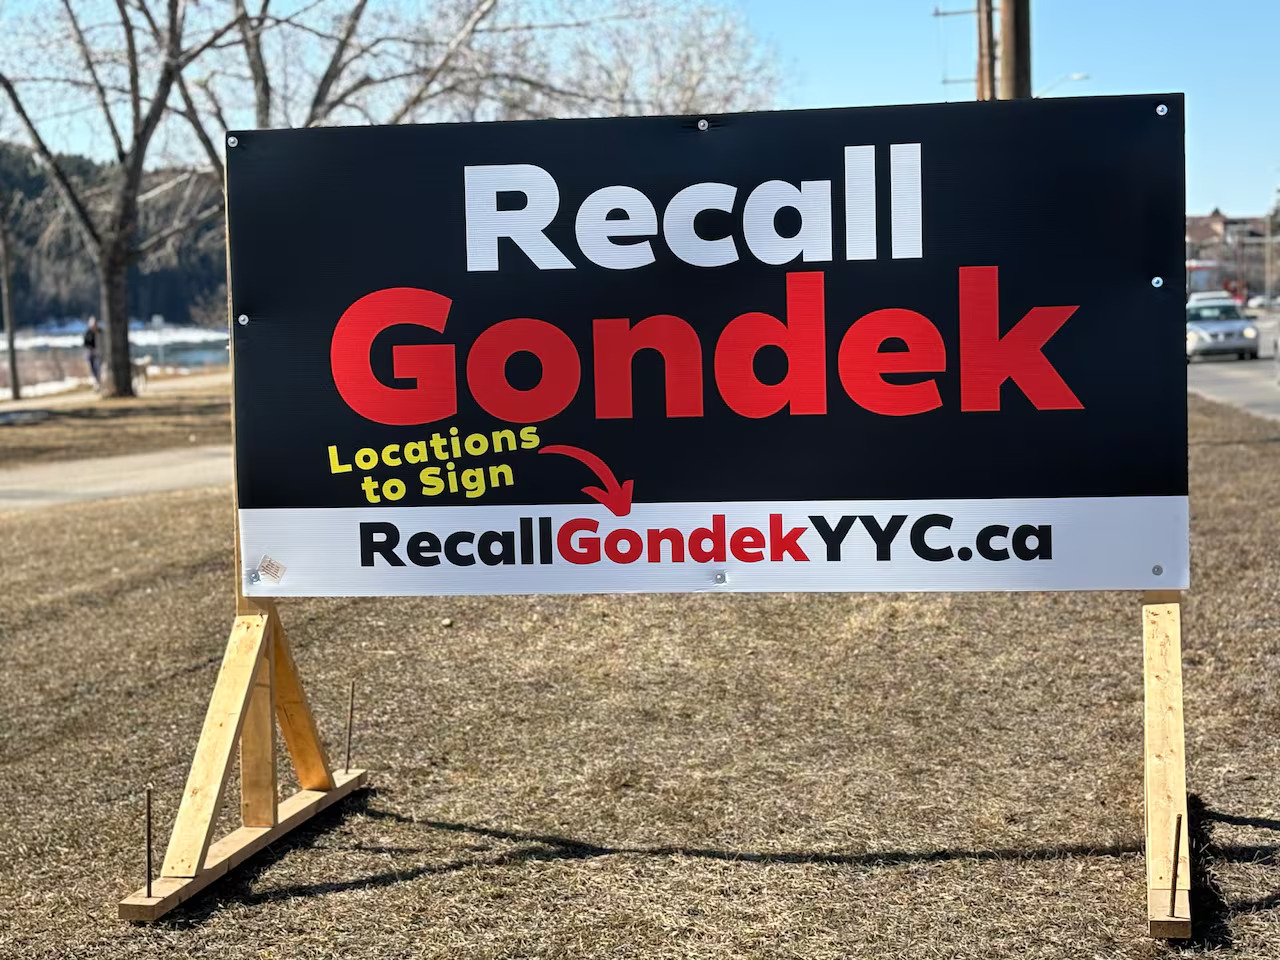 Frequently Asked Questions About The Recall Gondek Petition